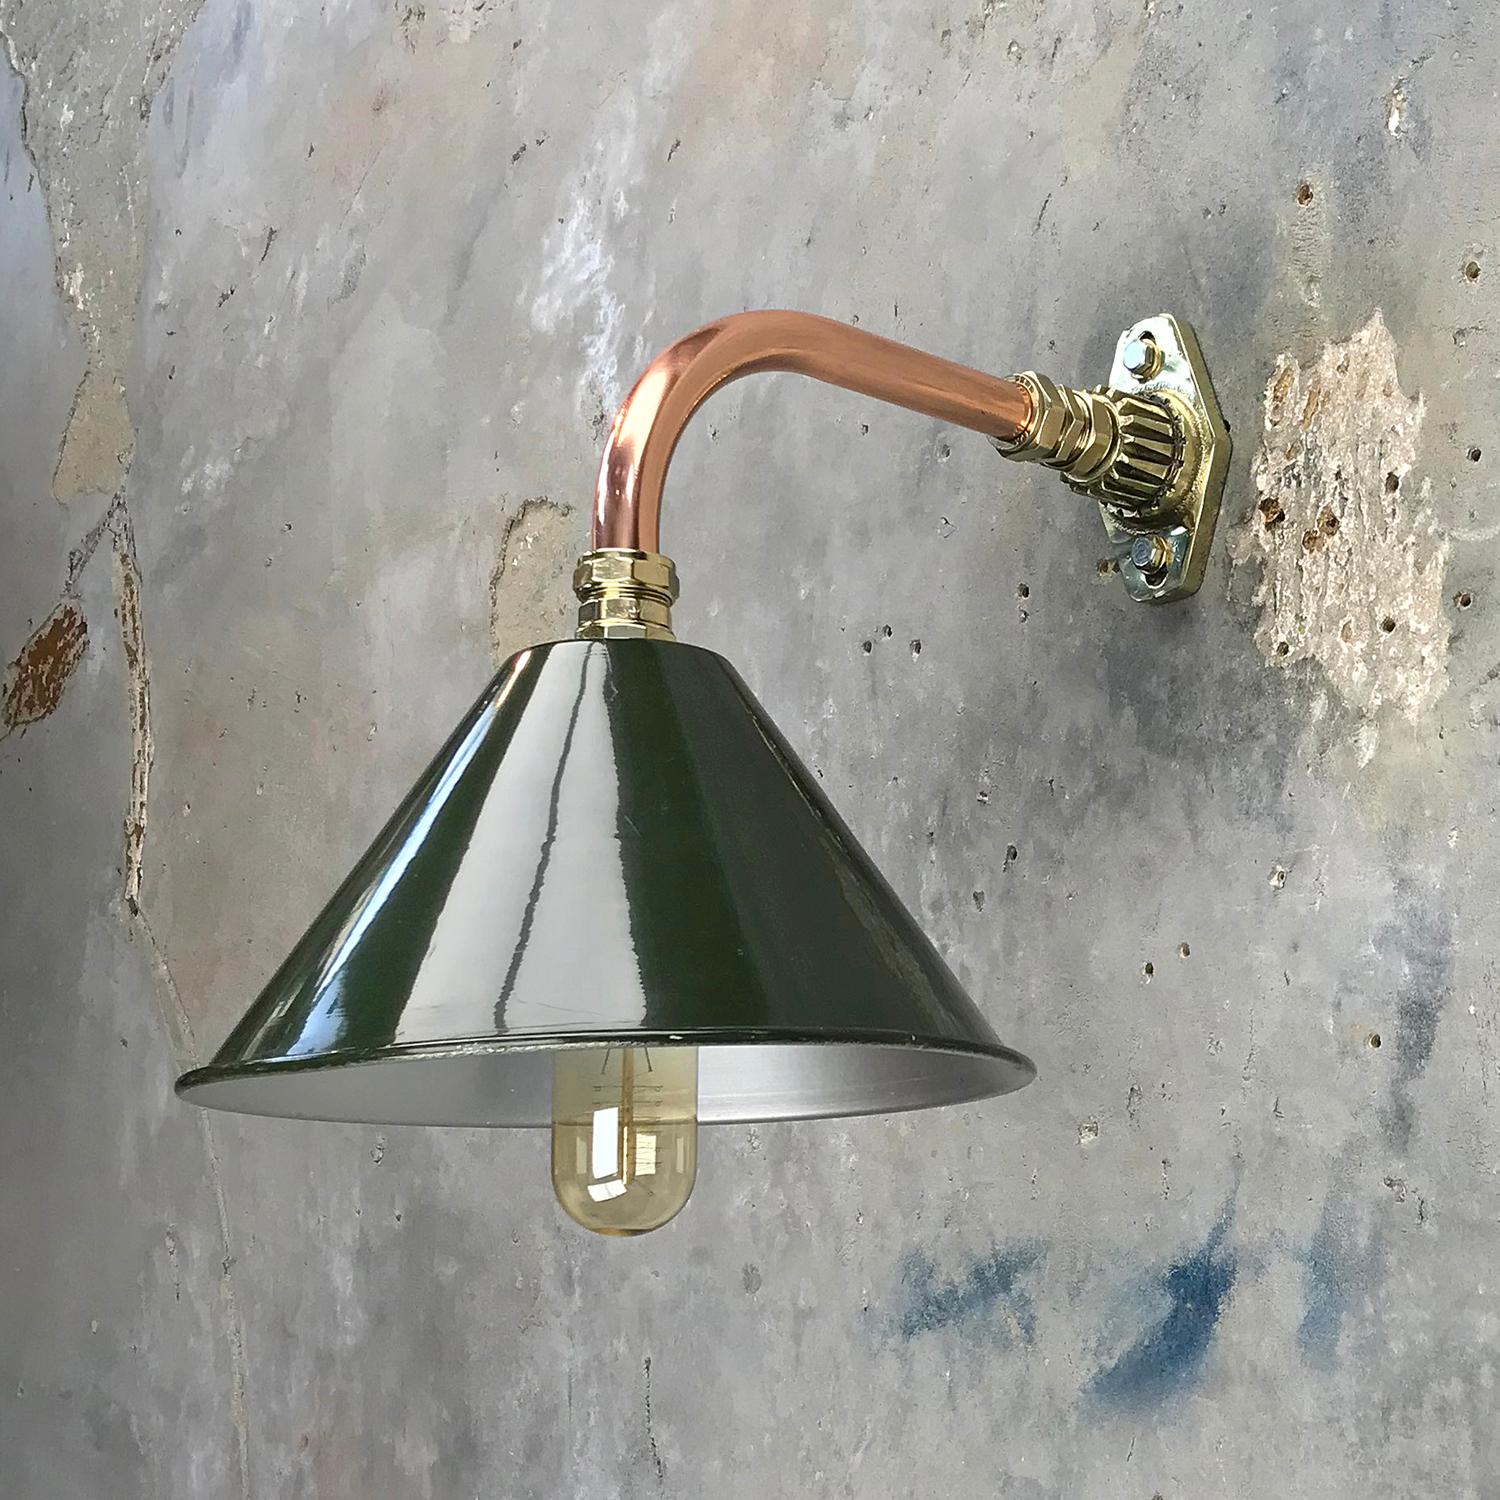 Ex British army festoon lamp shade fitted to a copper and brass cantilever fitting.

At Loomlight we have fabricated a copper and brass cantilever wall mount and we can offer customised dimensions for the reach of the lamp from the wall, we can